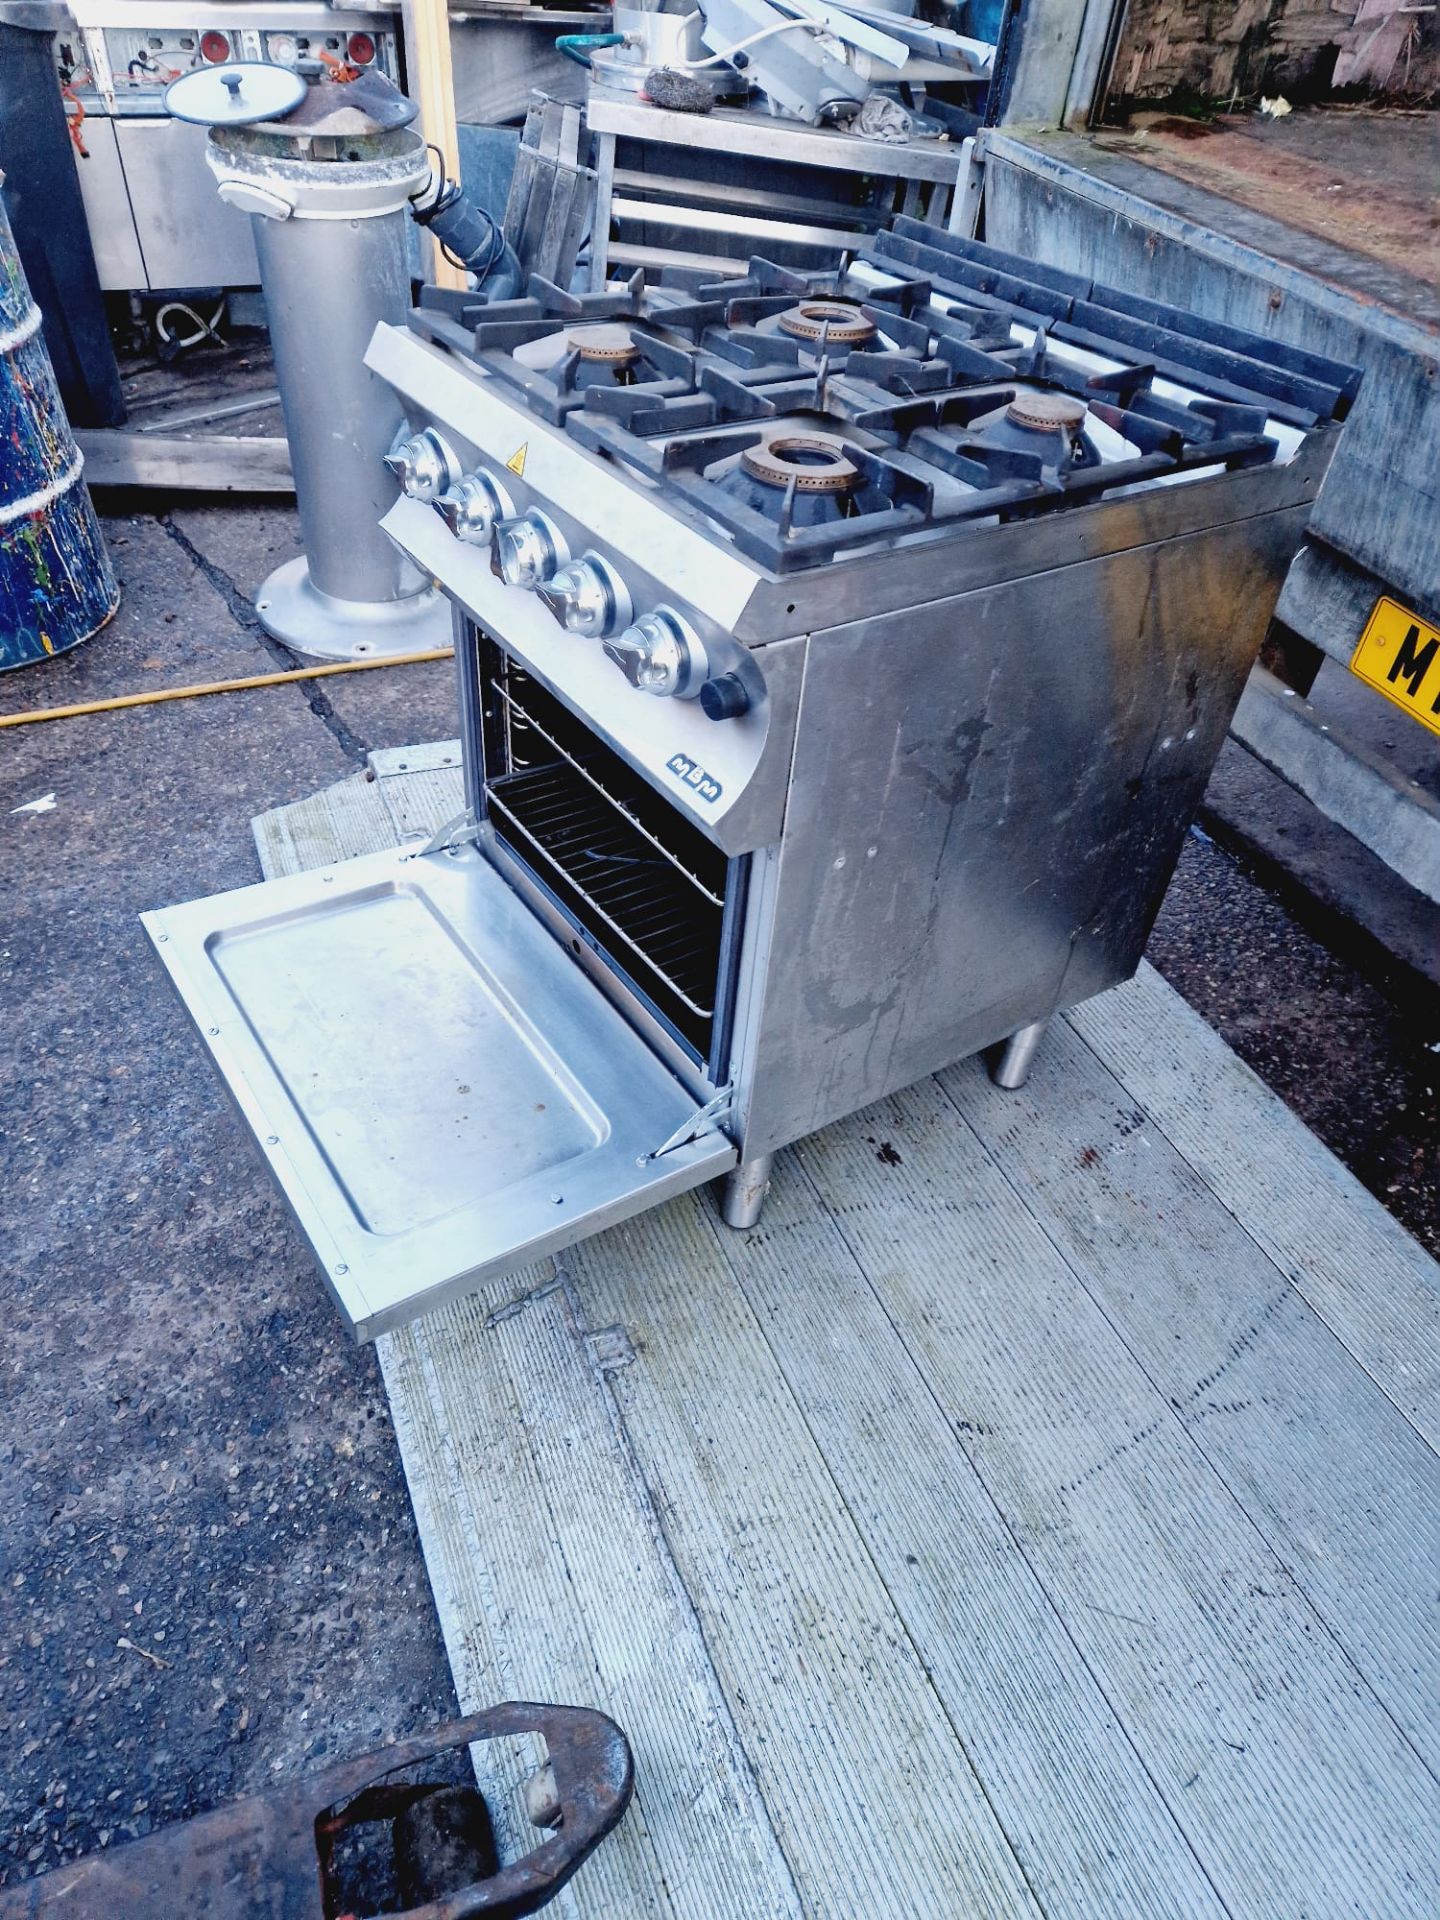 4 BURNER NATURAL GAS COOKER WITH OVEN ALMOST NEW CONDITION - WORKING AND SERVICED  - Image 3 of 4